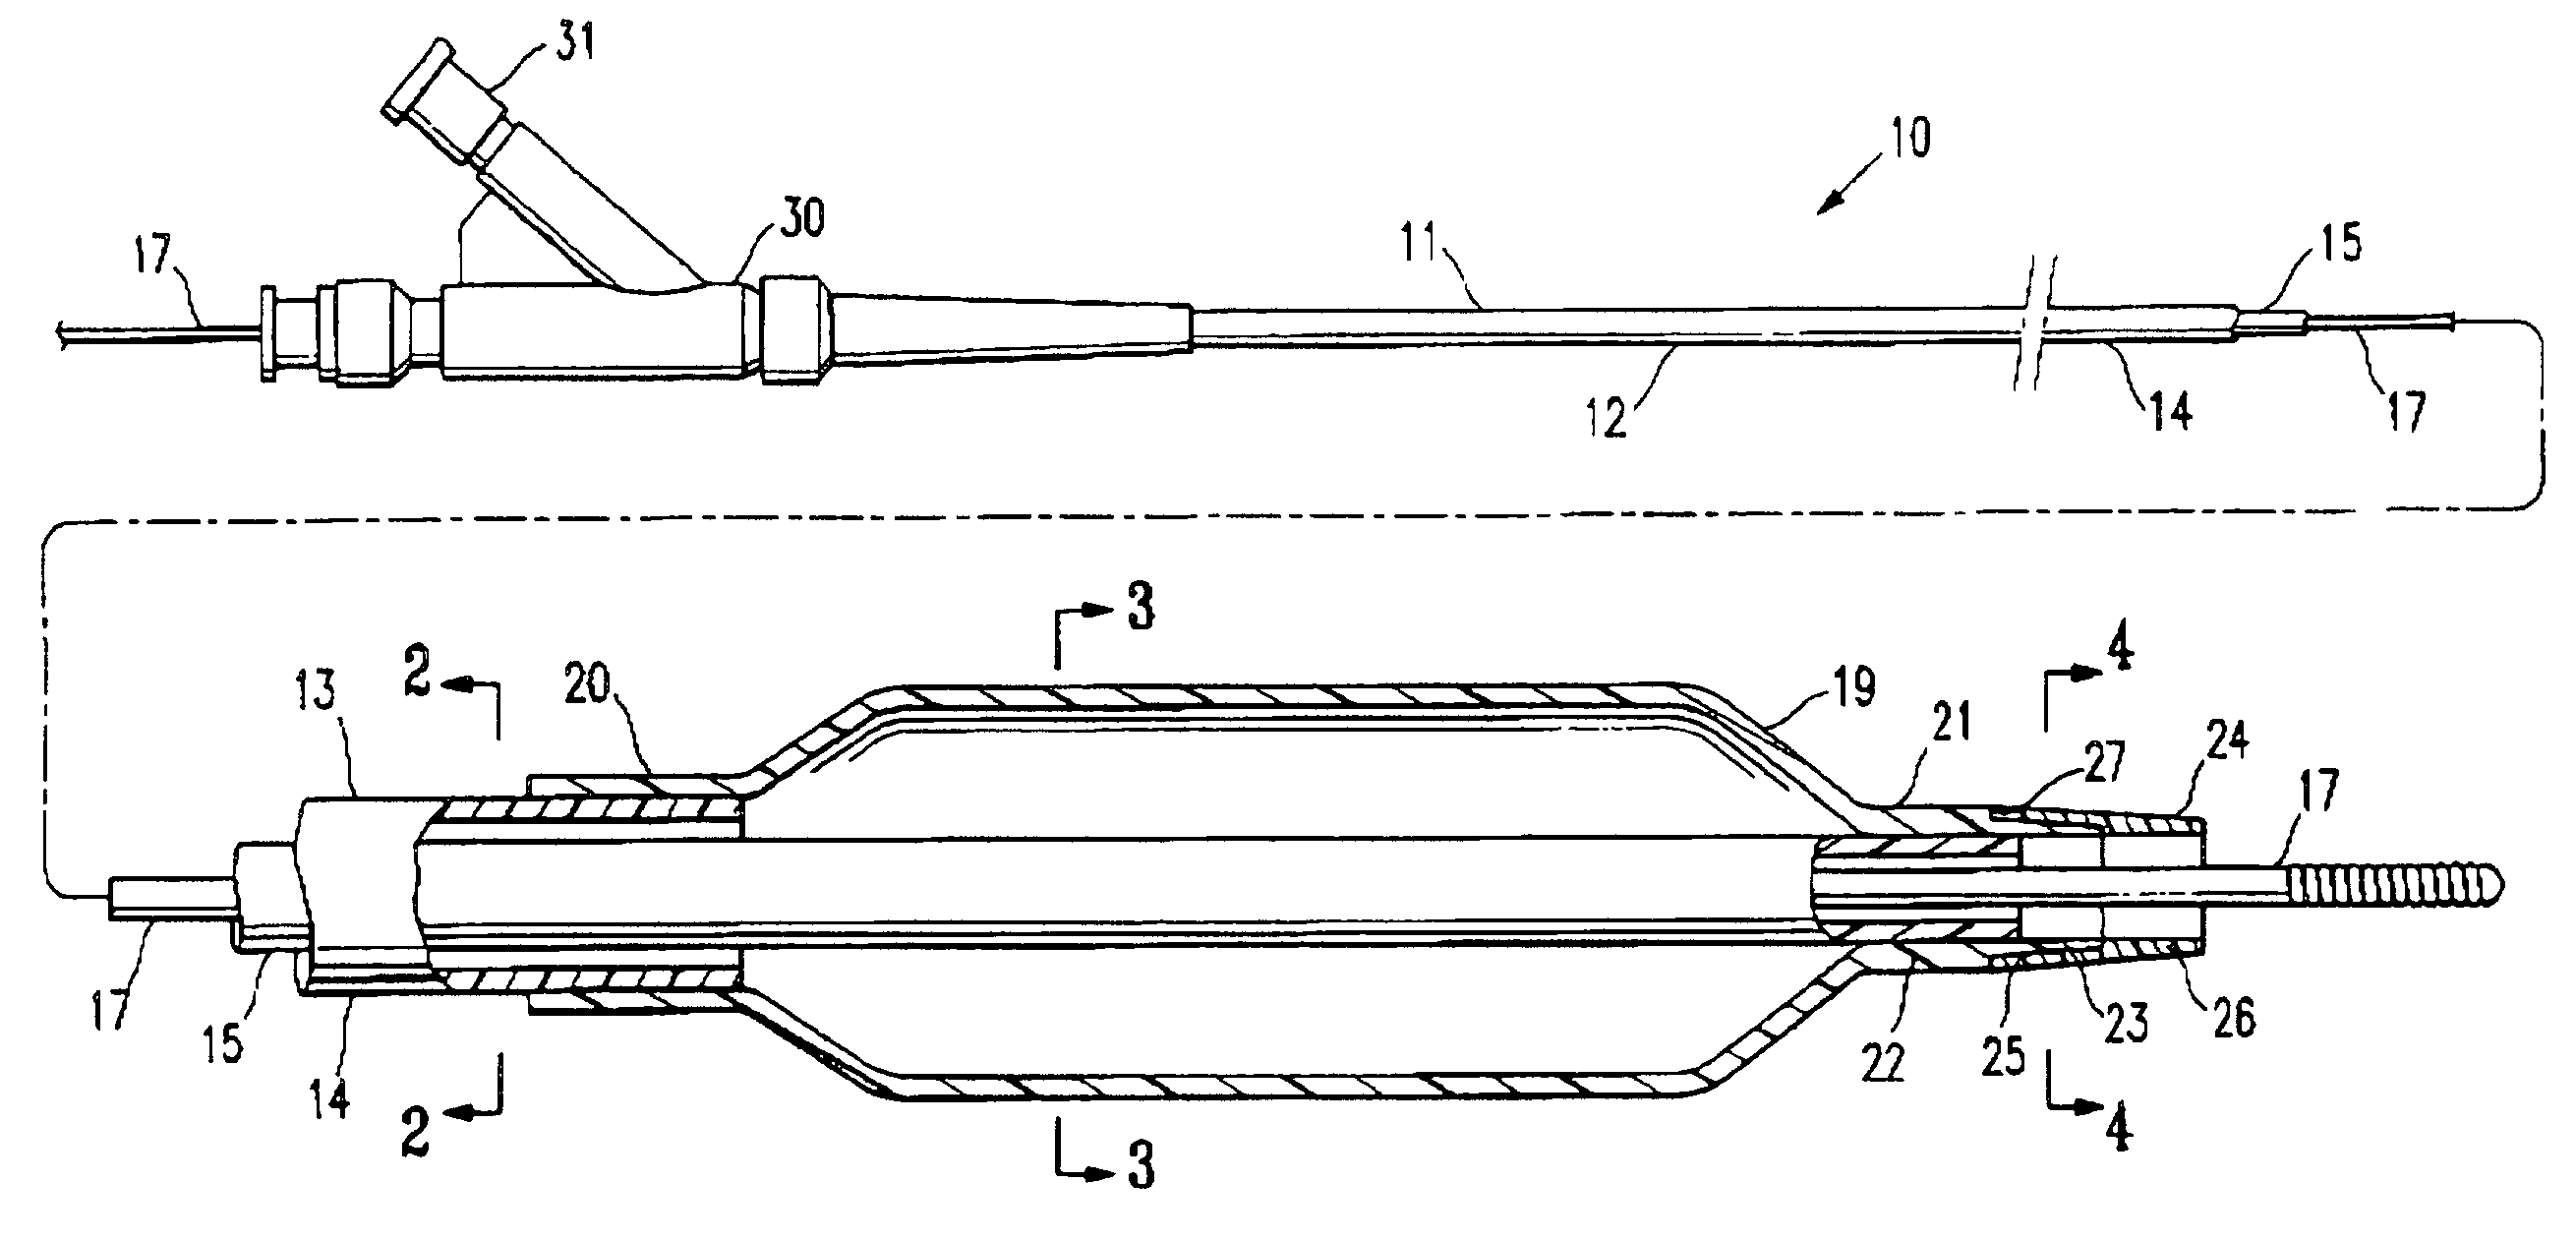 Balloon catheter having a balloon distal skirt section with a reduced outer diameter secured to a soft distal tip member